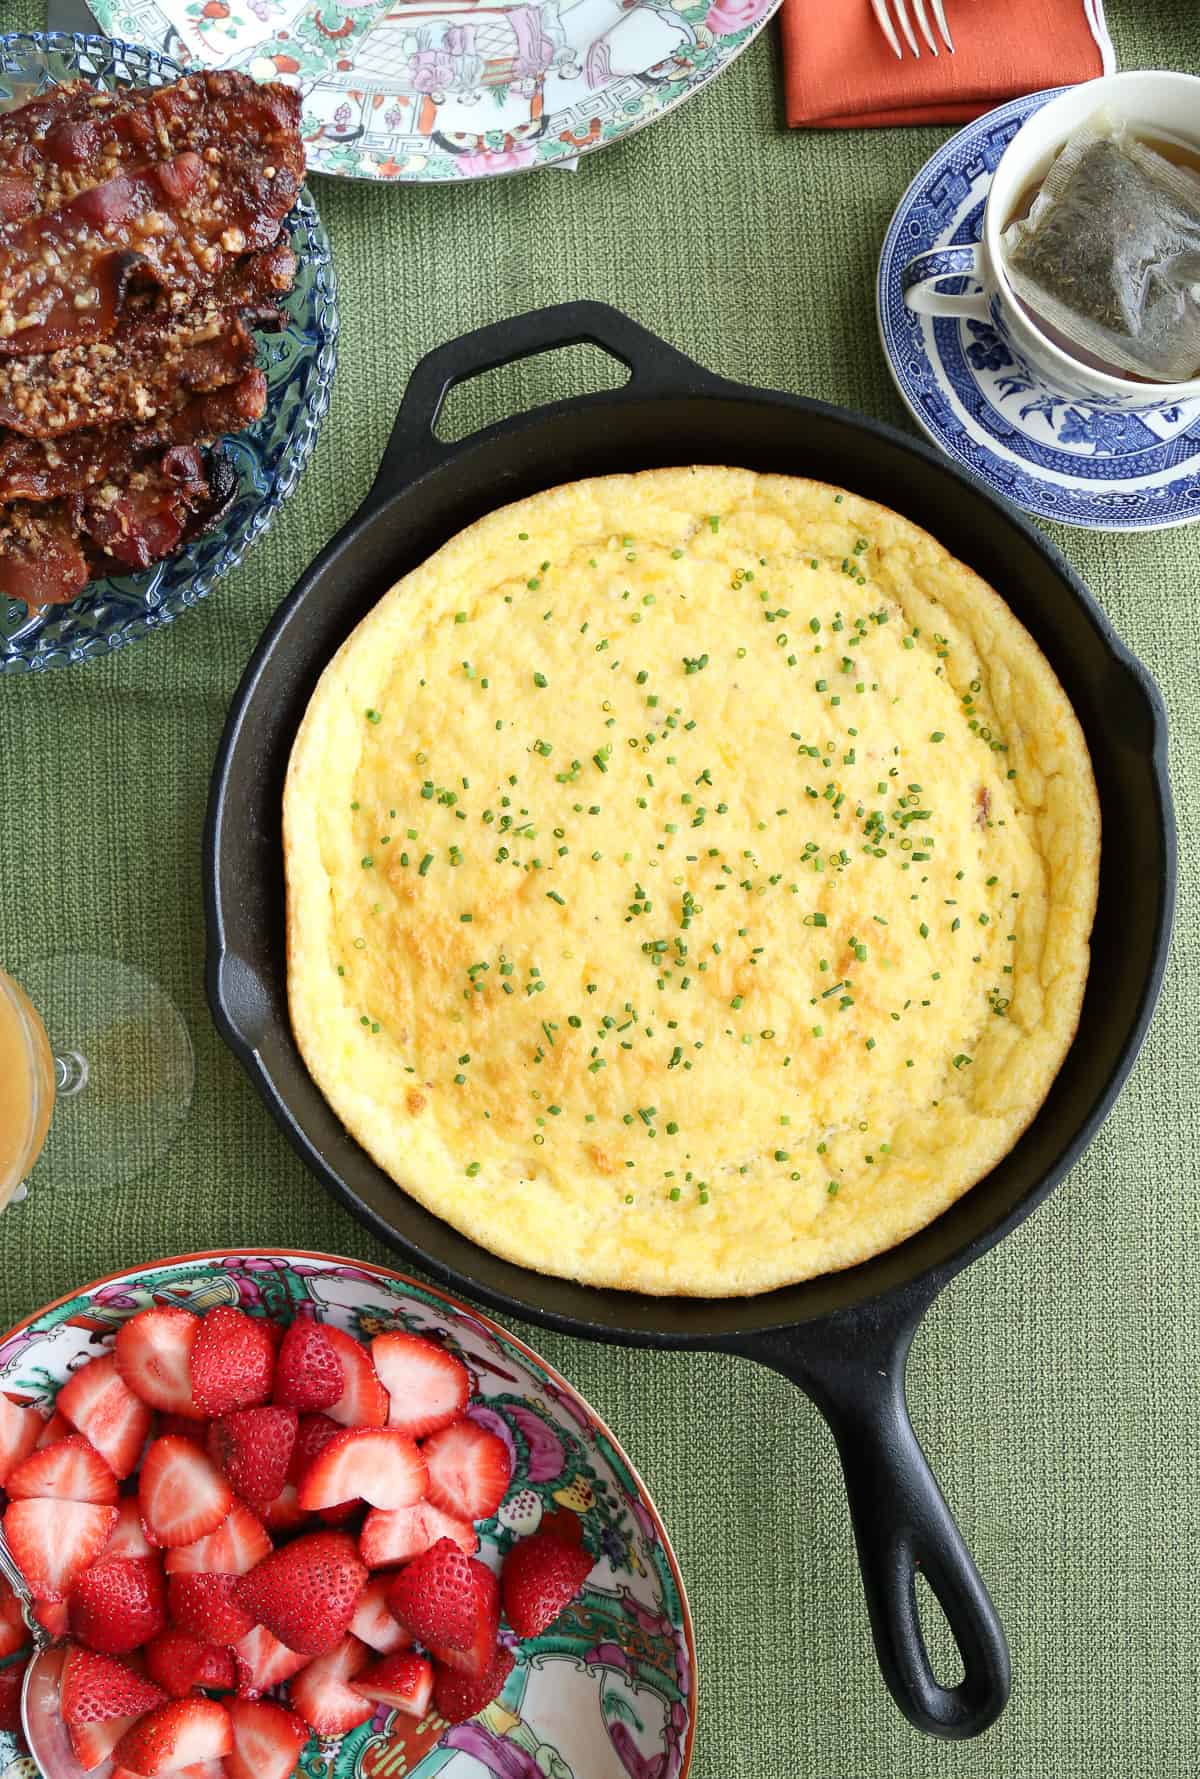 bacon cheddar spoon bread in a cast iron skillet on a green tablecloth.